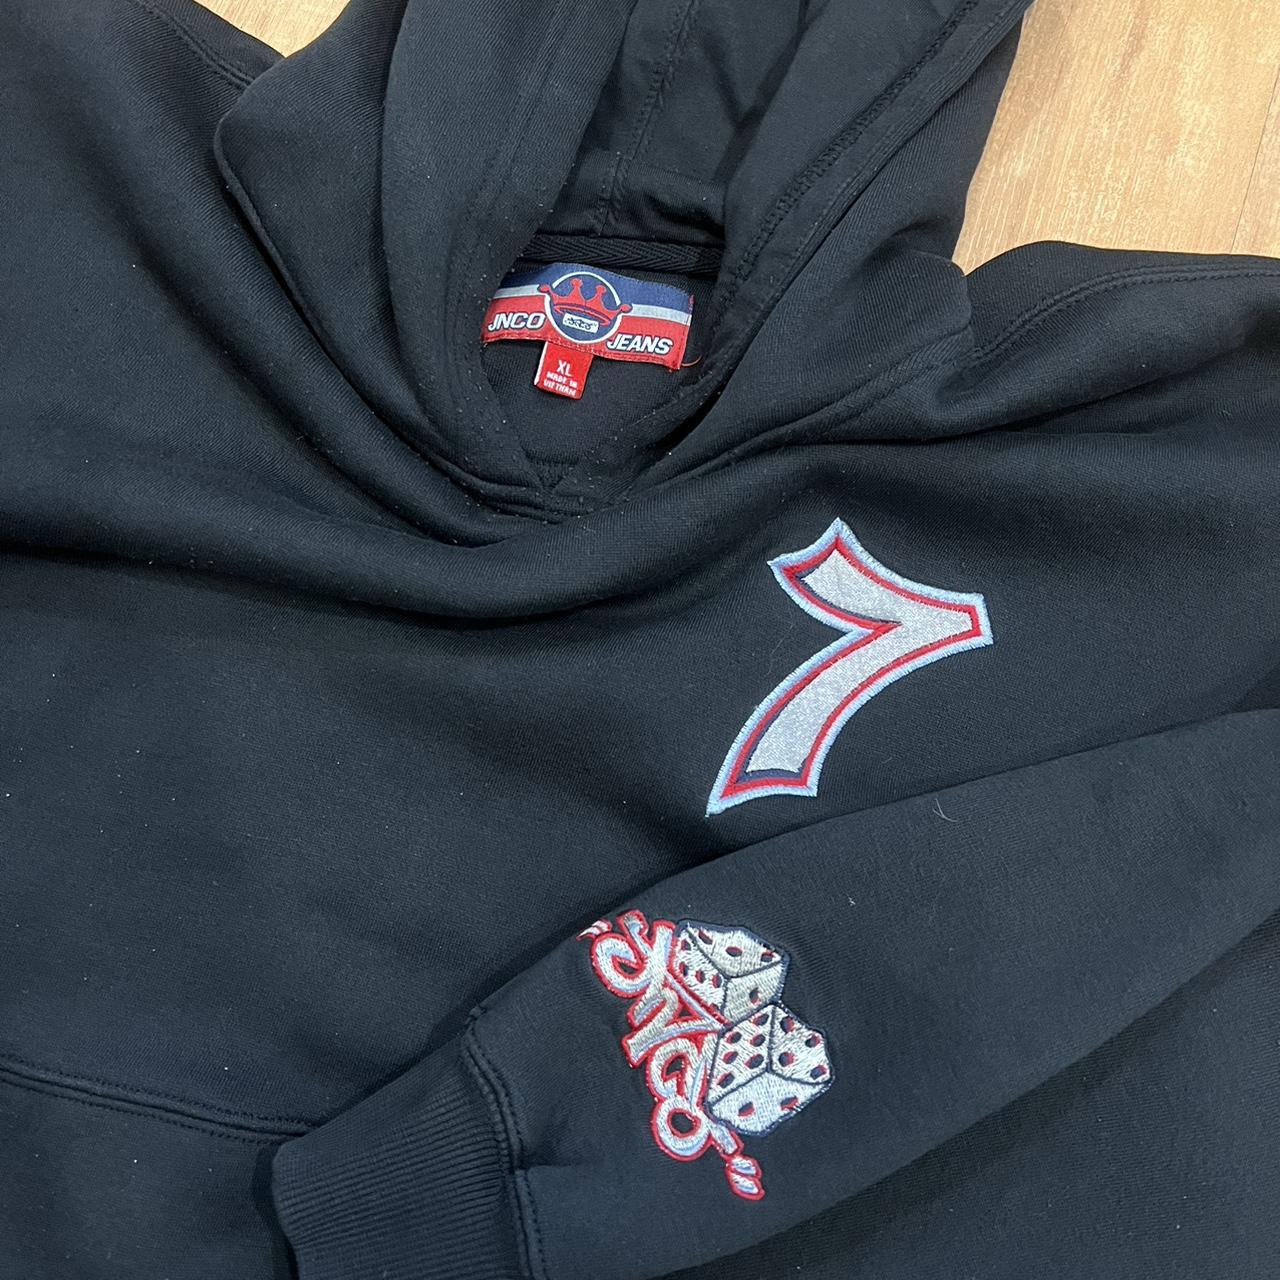 JNCO JEANS Embroidered Lucky dice hoodie size... - Depop